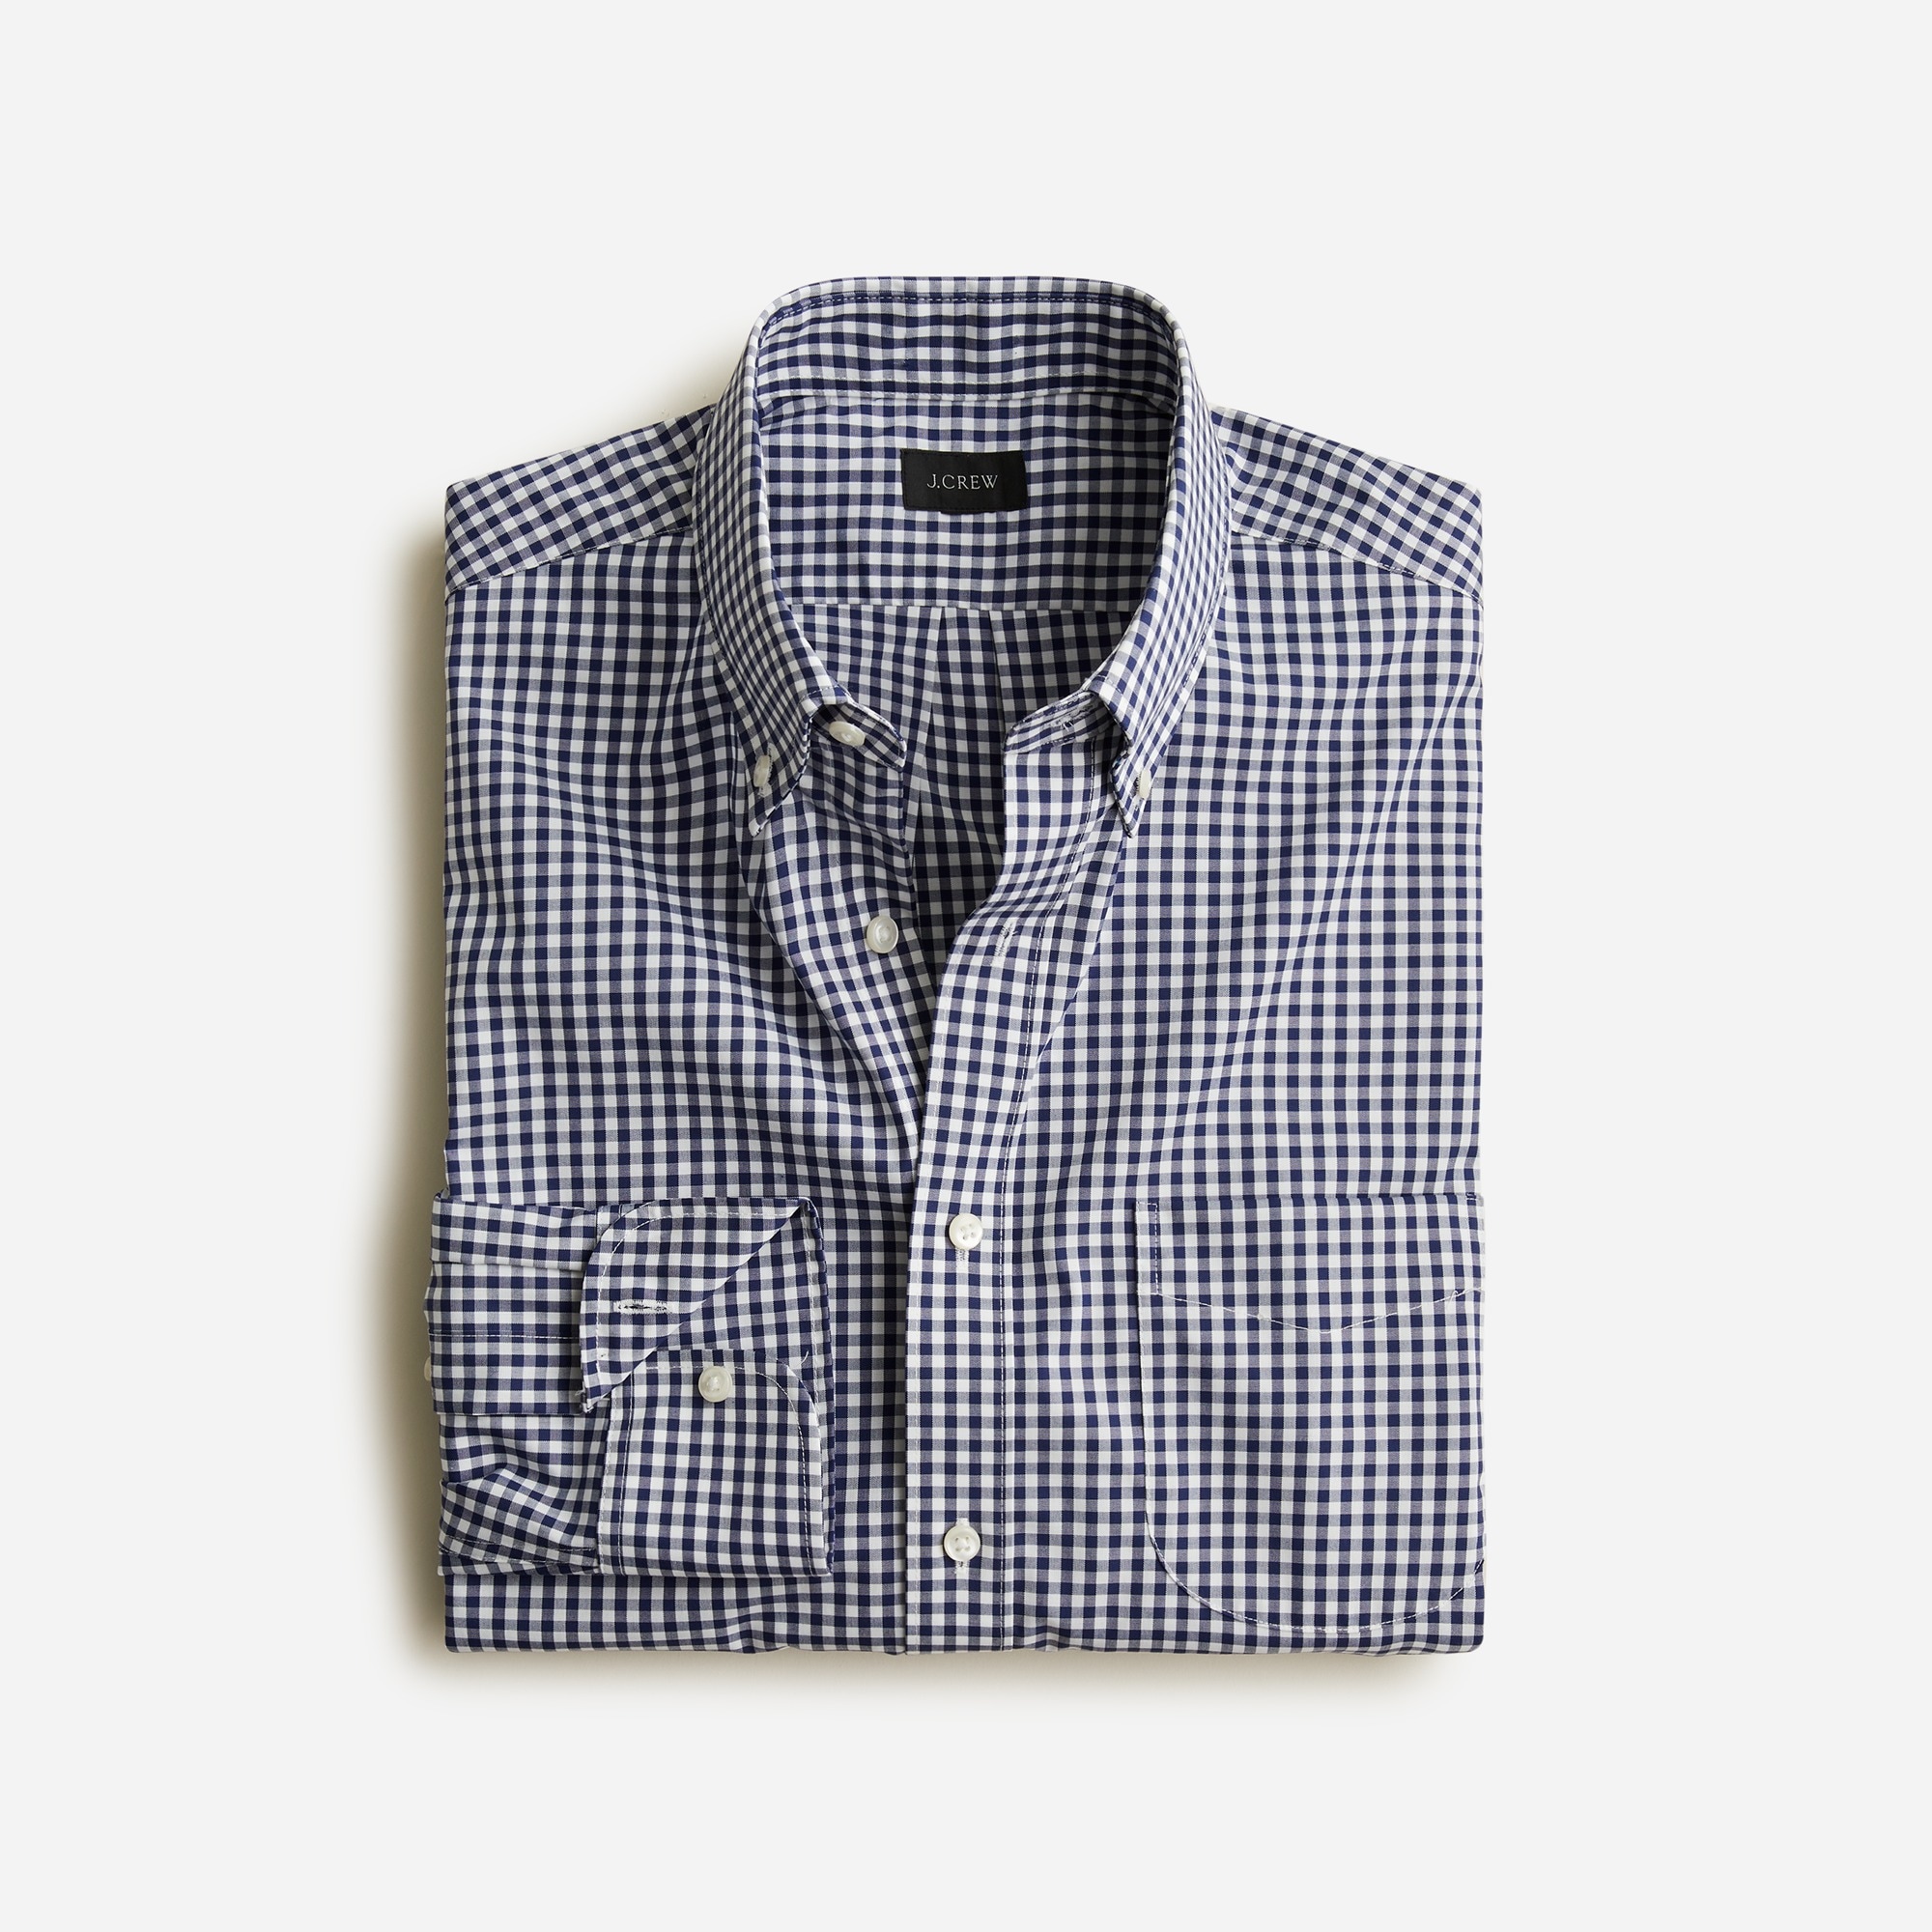 mens Bowery wrinkle-free dress shirt with button-down collar